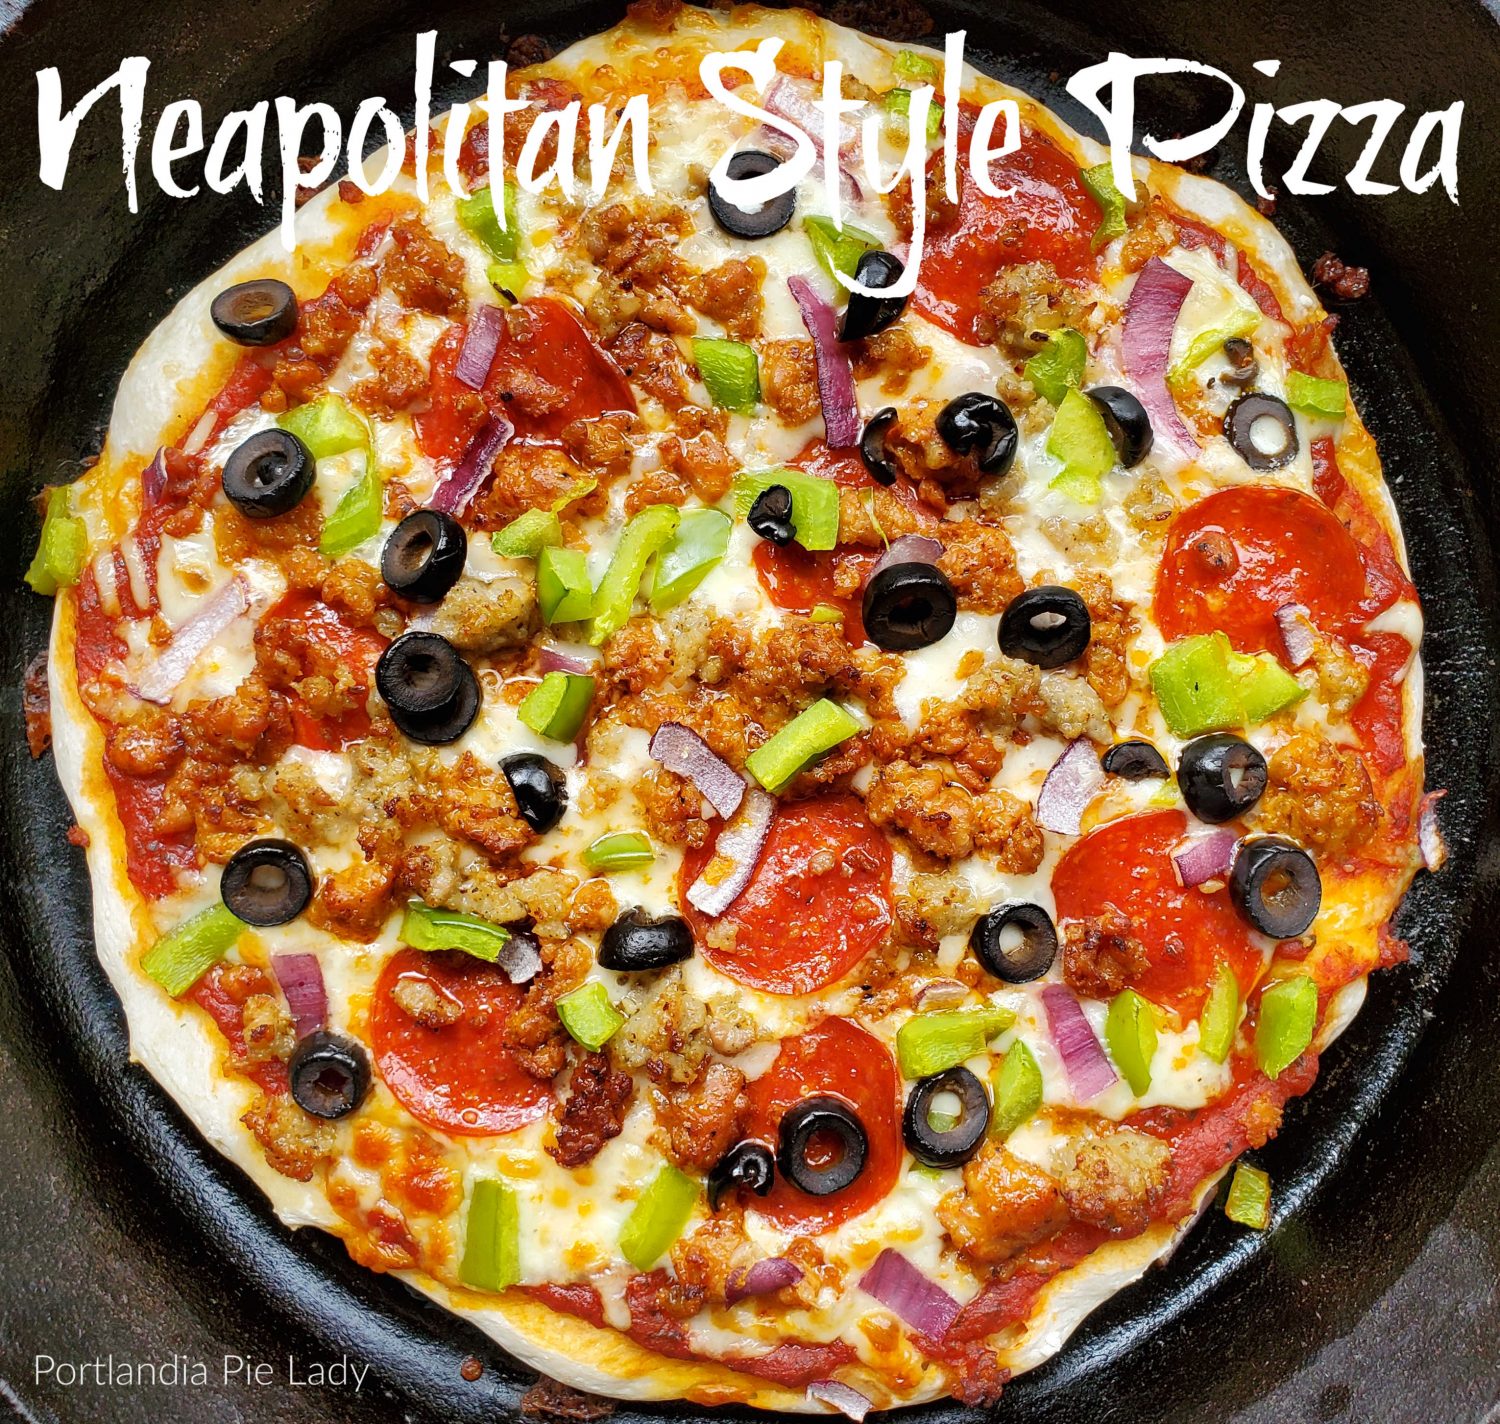 Neapolitan dough is made up ahead of time for a quick and easy, but very tasty authentic pizza night. Biggest choice: Red or White sauce and toppings!